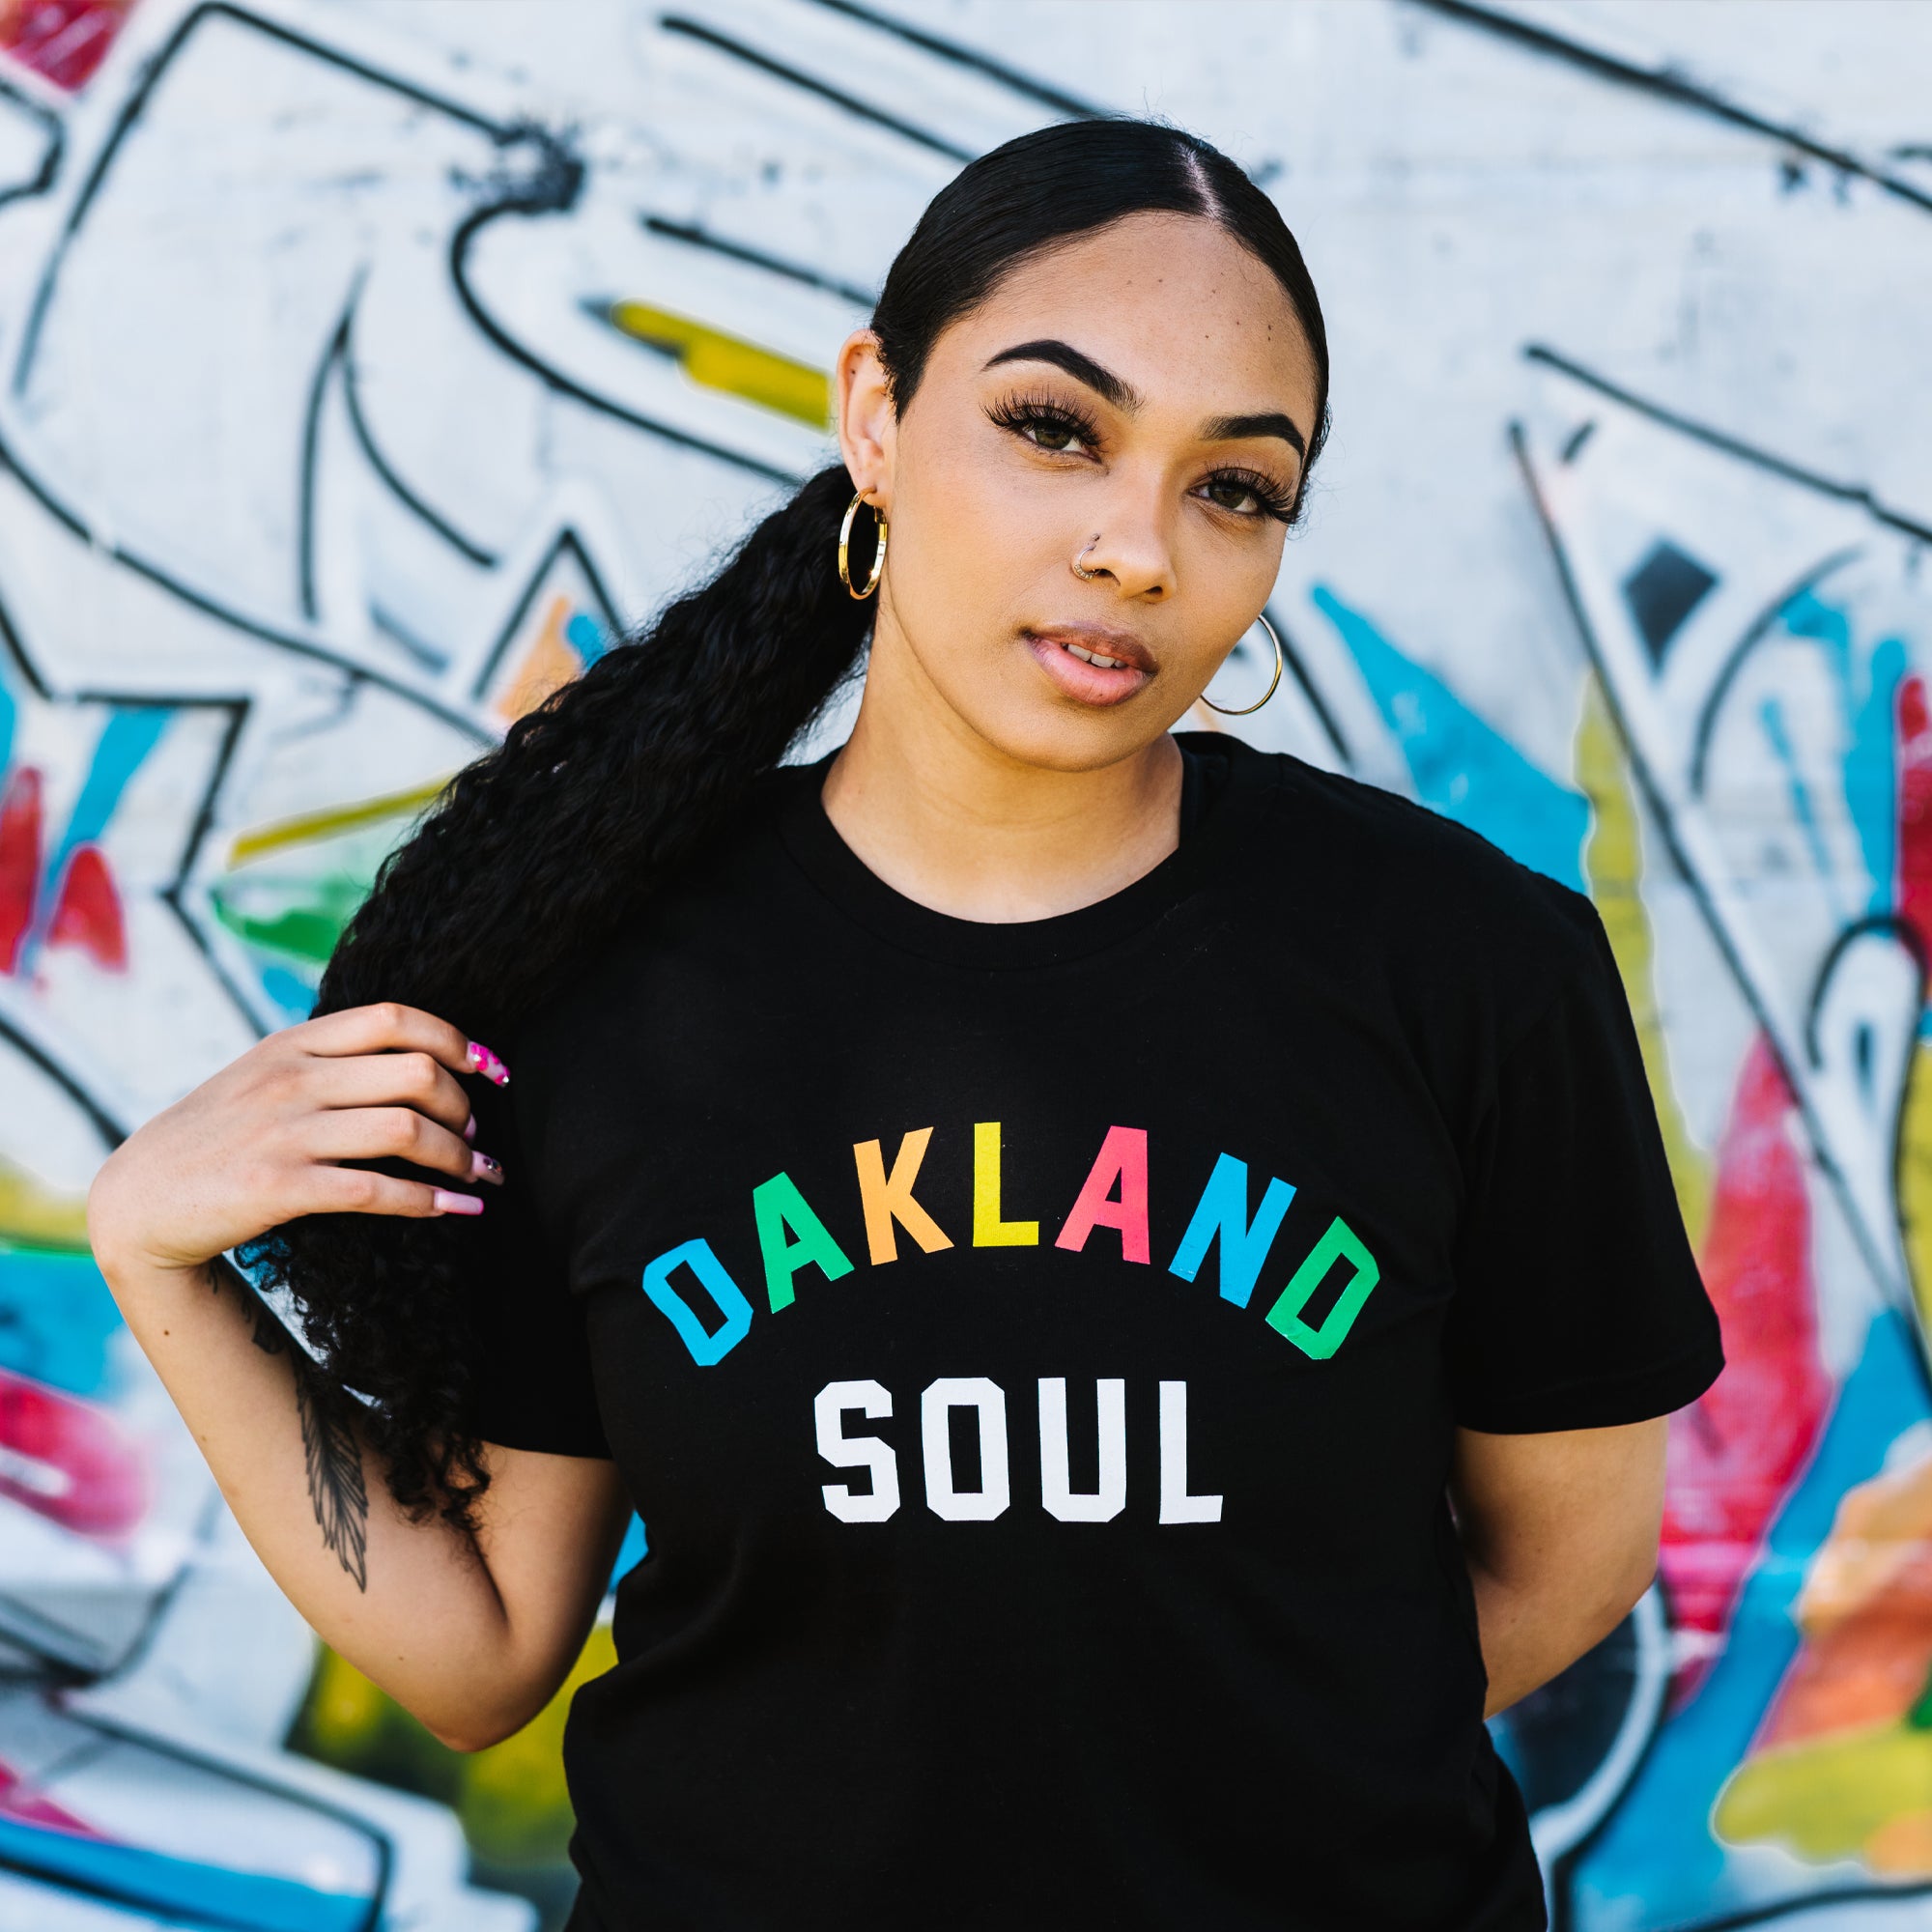 Woman from waist up, wearing black t-shirt with full color Oakland Soul wordmark logo. Blurred graffiti background.